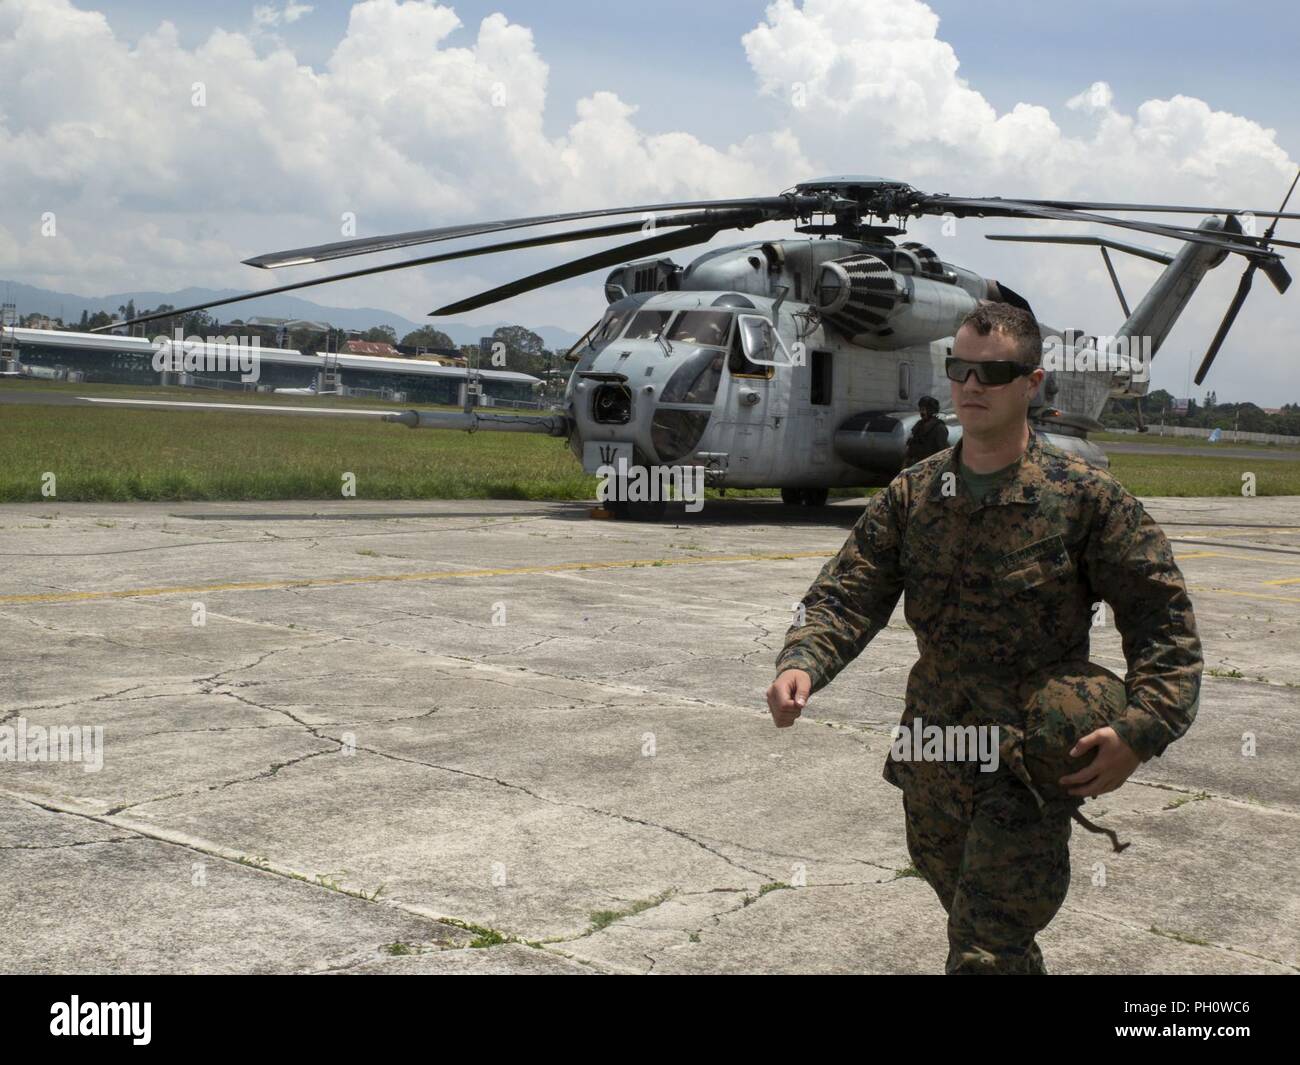 U.S. Marine Sgt. Erik Demay, the Marine Corps Community Services chief with Special Purpose Marine Air-Ground Task Force - Southern Command, walks off the flight line to check into the immigration office in Guatemala City, Guatemala, June 20, 2018. Leaders with SPMAGT-SC visited Marines and sailors in Puerto Barrios and Flores, Guatemala, to deliver supplies and check on the welfare of the troops.  The Marines and sailors of SPMAGTF-SC are conducting security cooperation training and engineering projects alongside partner nation military forces in Central and South America. The unit is also on Stock Photo